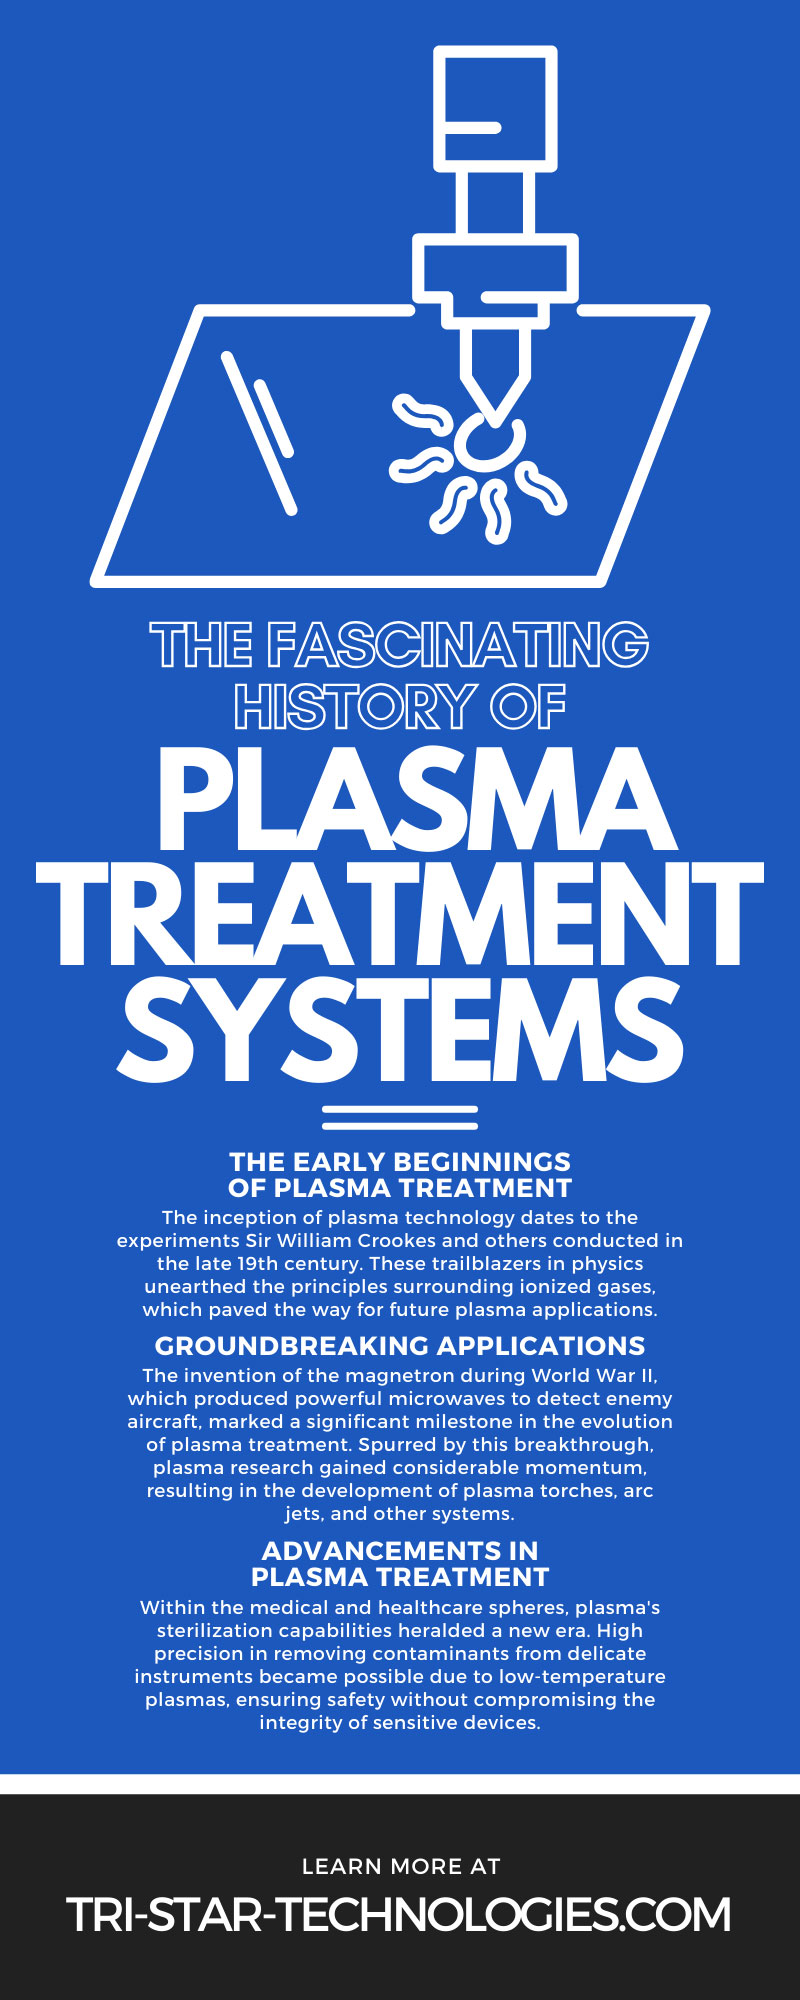 The Fascinating History of Plasma Treatment Systems